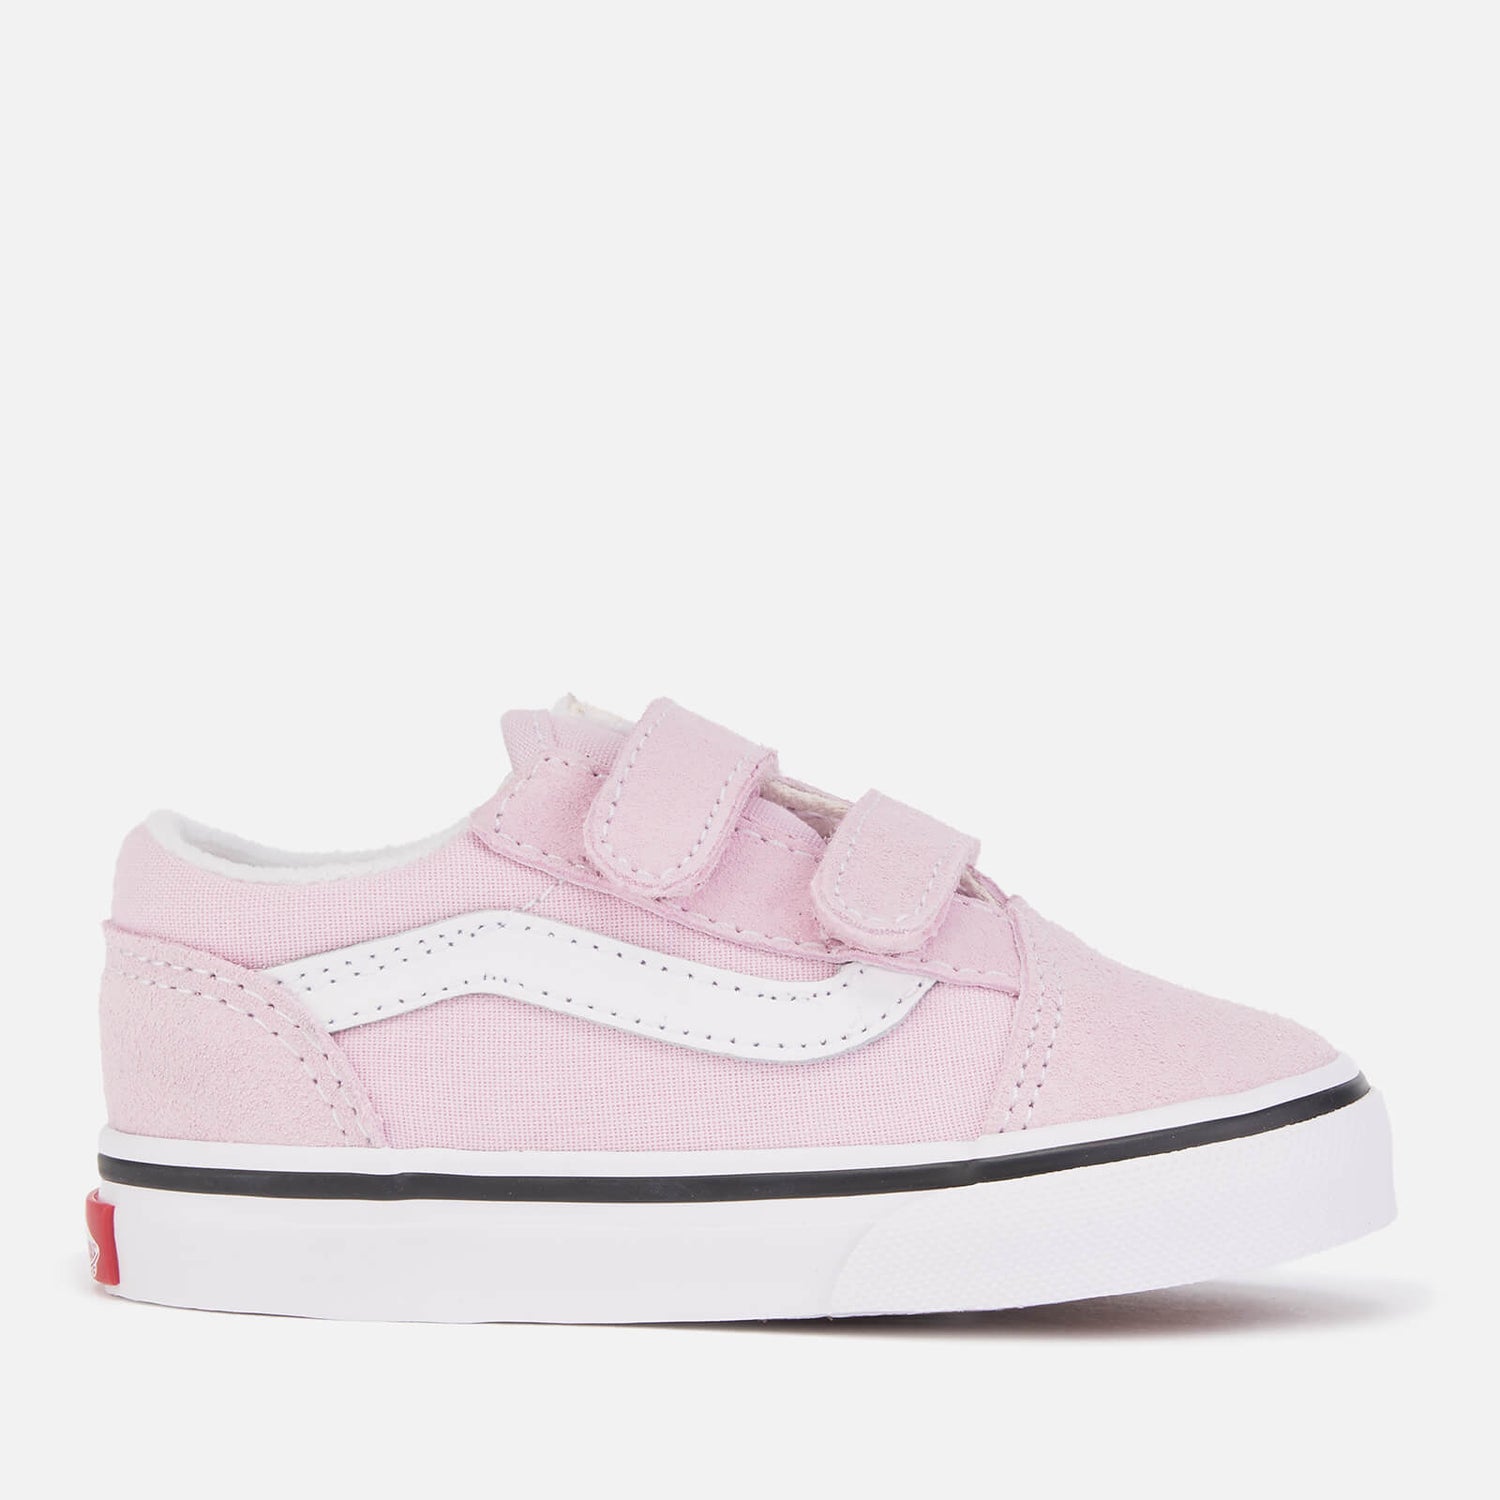 Vans Toddlers' Old Skool Velcro Trainers - Lilac Snow/True White